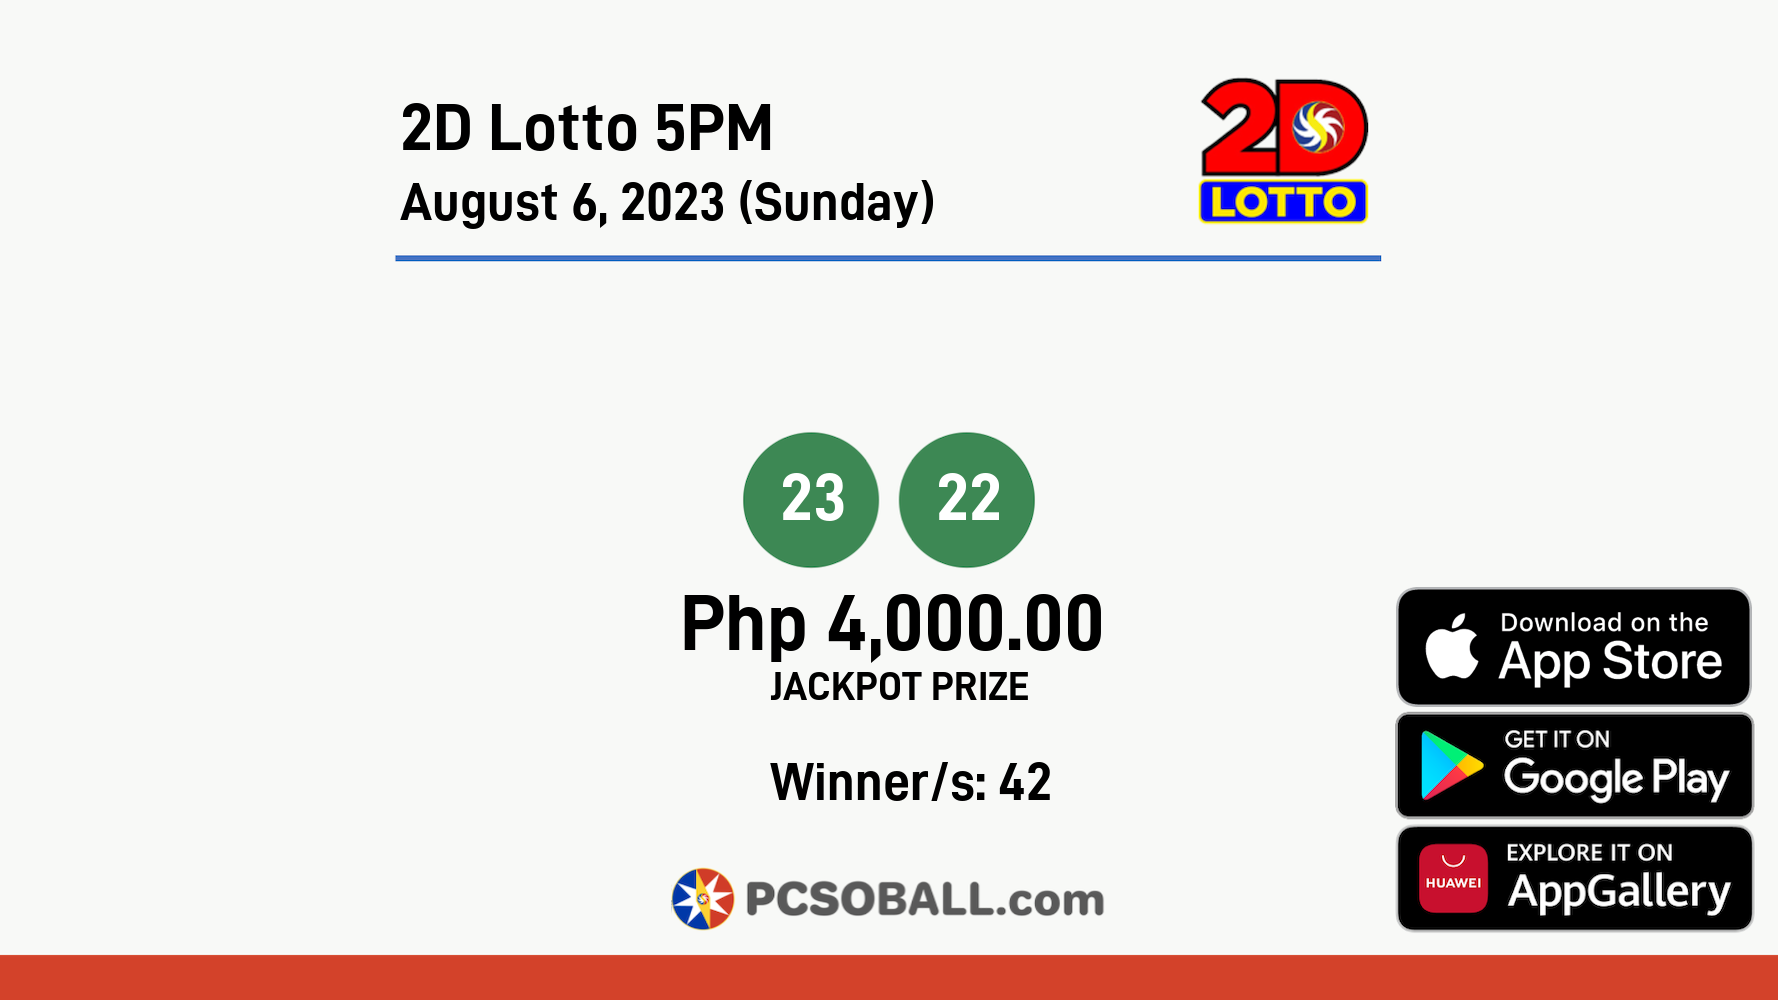 2D Lotto 5PM August 6, 2023 (Sunday) Result